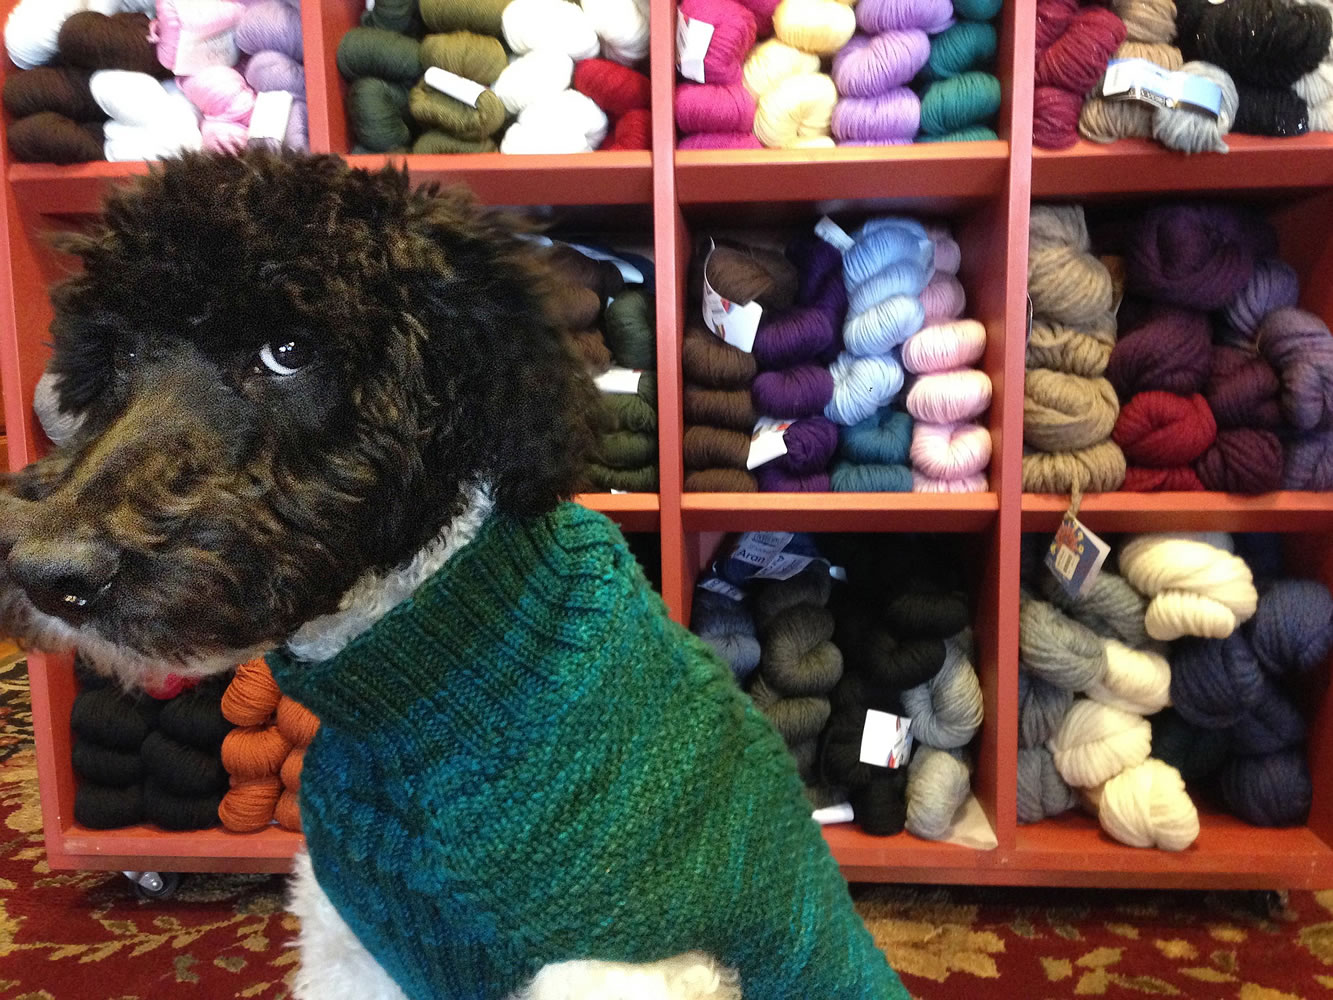 Toby, a 4-month-old standard poodle, wears his knitted sweater when he accompanies his owner, Ruthie Kolb, to the Knit Knack shop in Arvada, Colo.